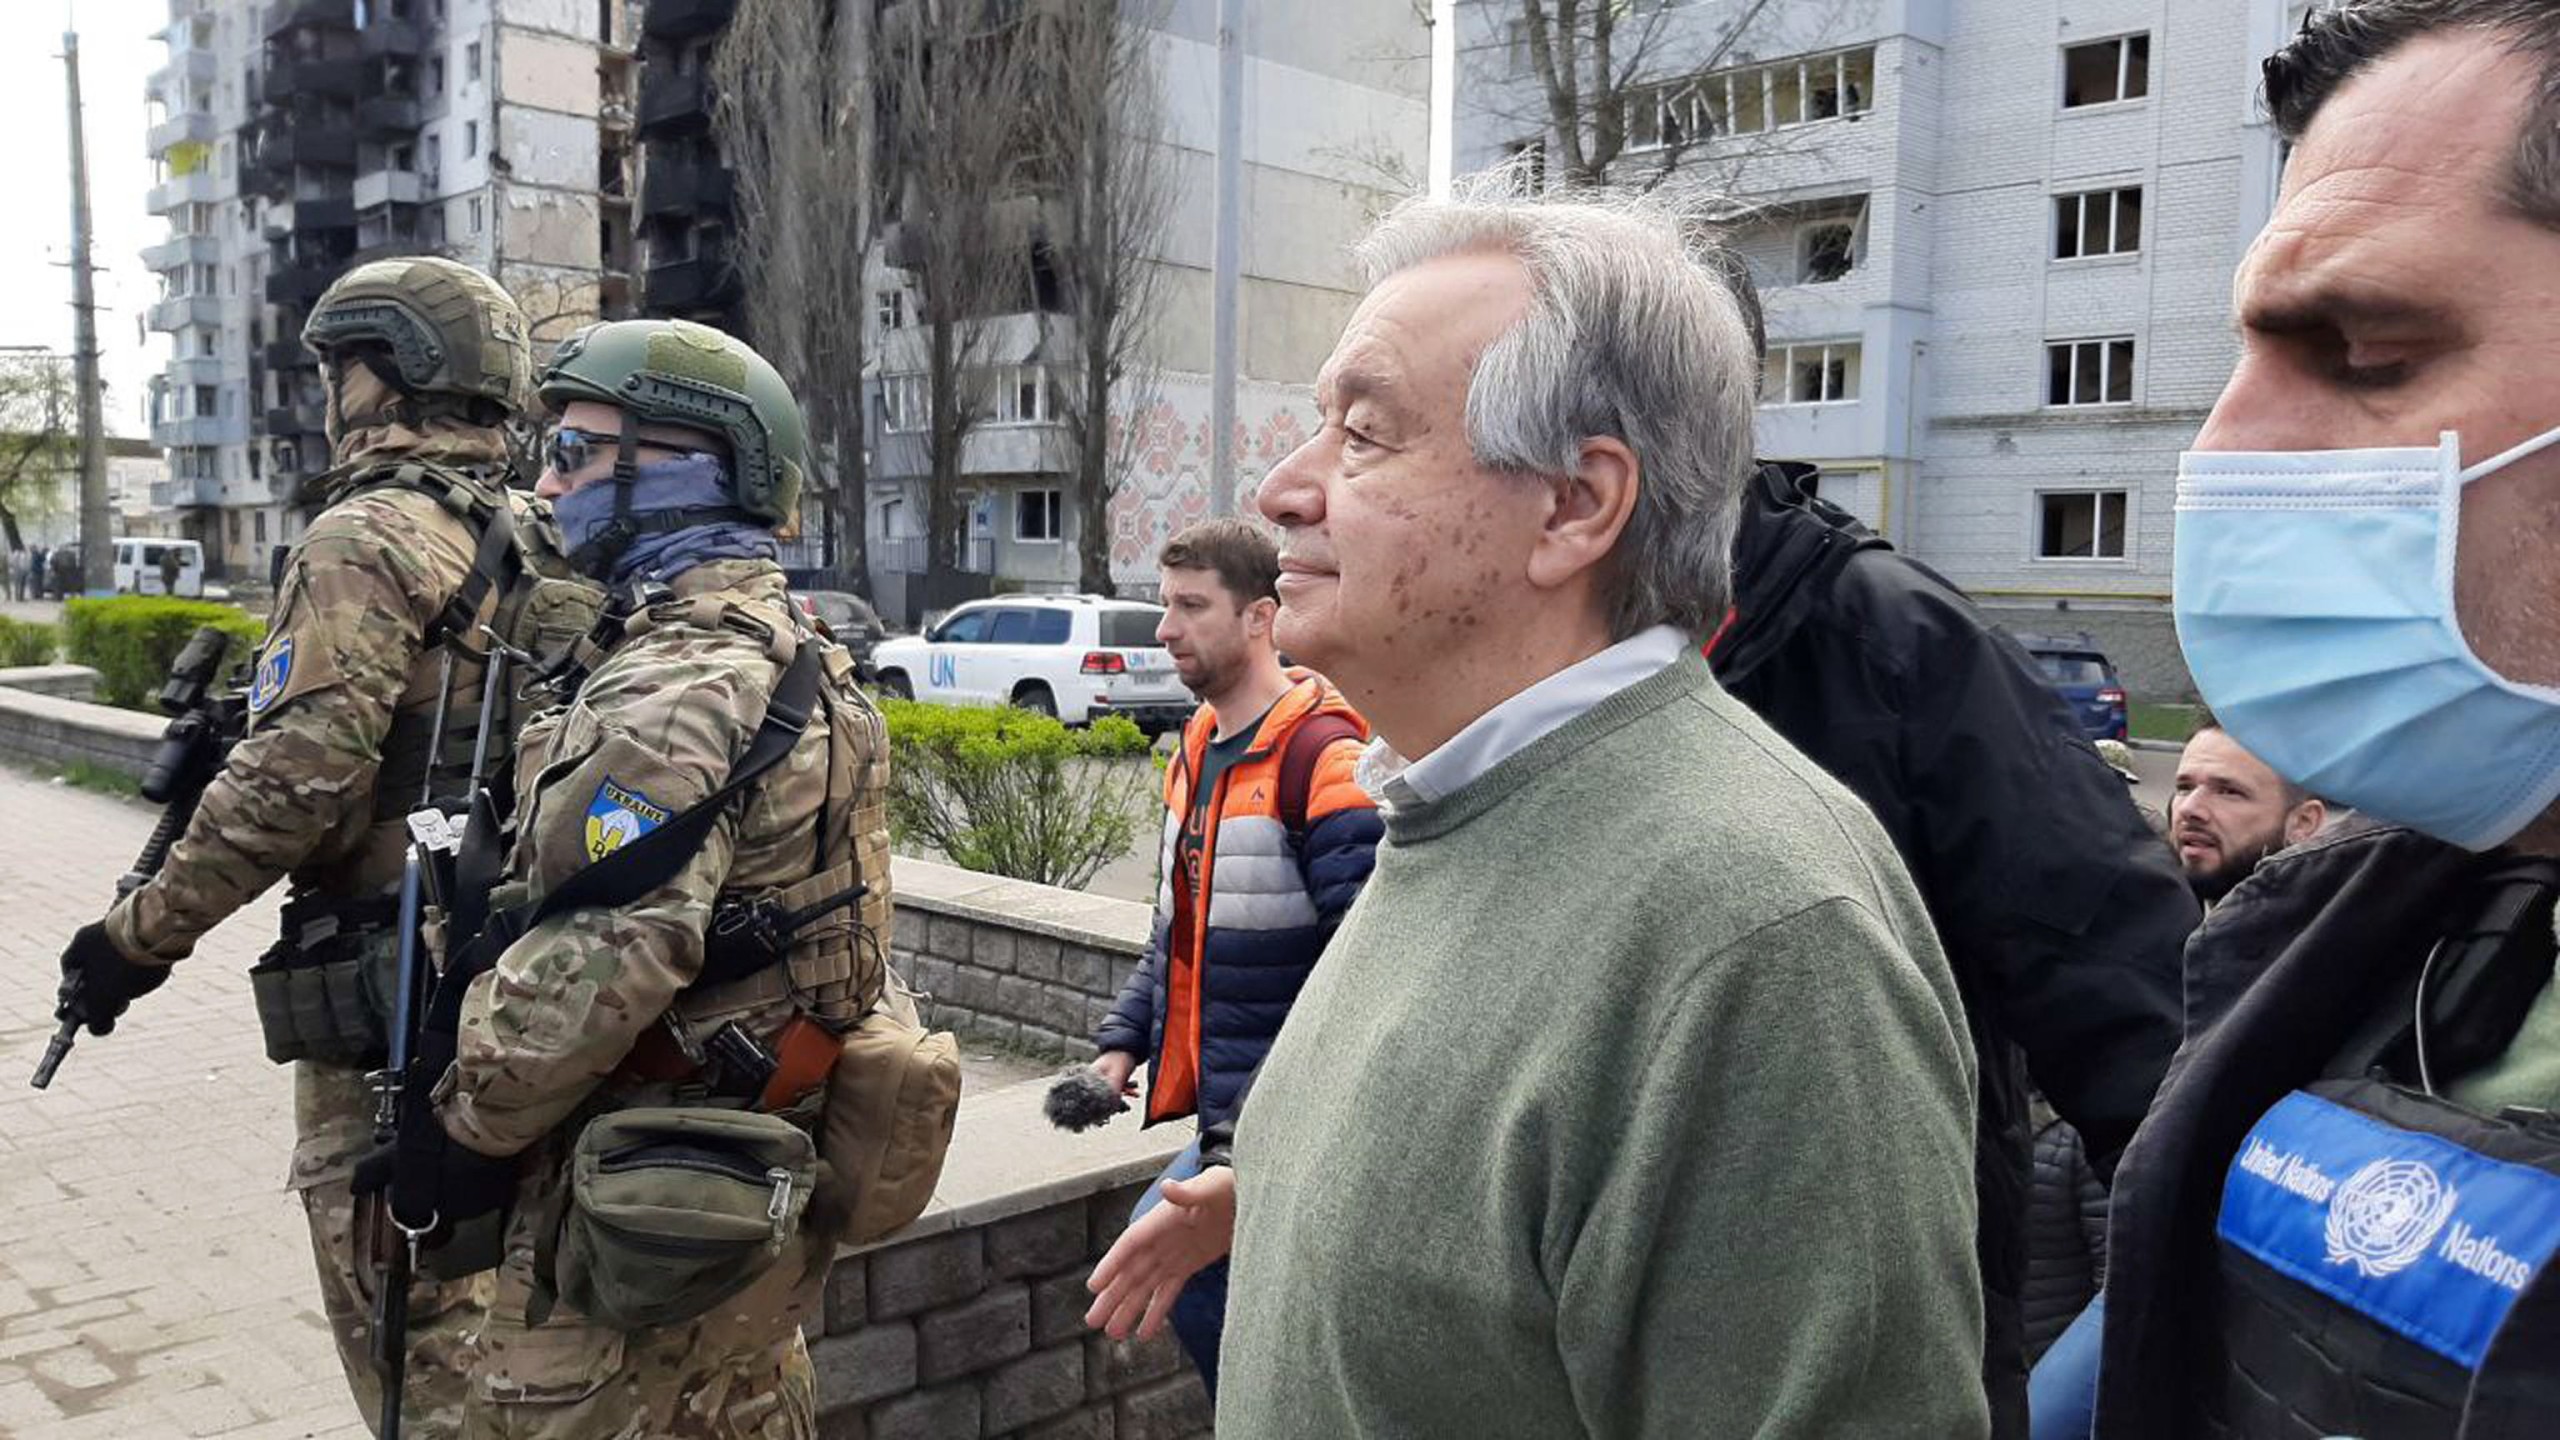 epa09913756 UN Secretary-General Antonio Guterres (2-R) looks on during his visit to Borodyanka, Ukraine, 28 April 2022. UN Secretary General Antonio Gurterres is scheduled to visit the Kiev quarters as well as the theater of operations attributed to the Russian forces, including Bucha, Irpin and Borodianka. Guterres arrived in Ukraine after a visit to Moscow.  EPA/Laurence Figa-Talamanca